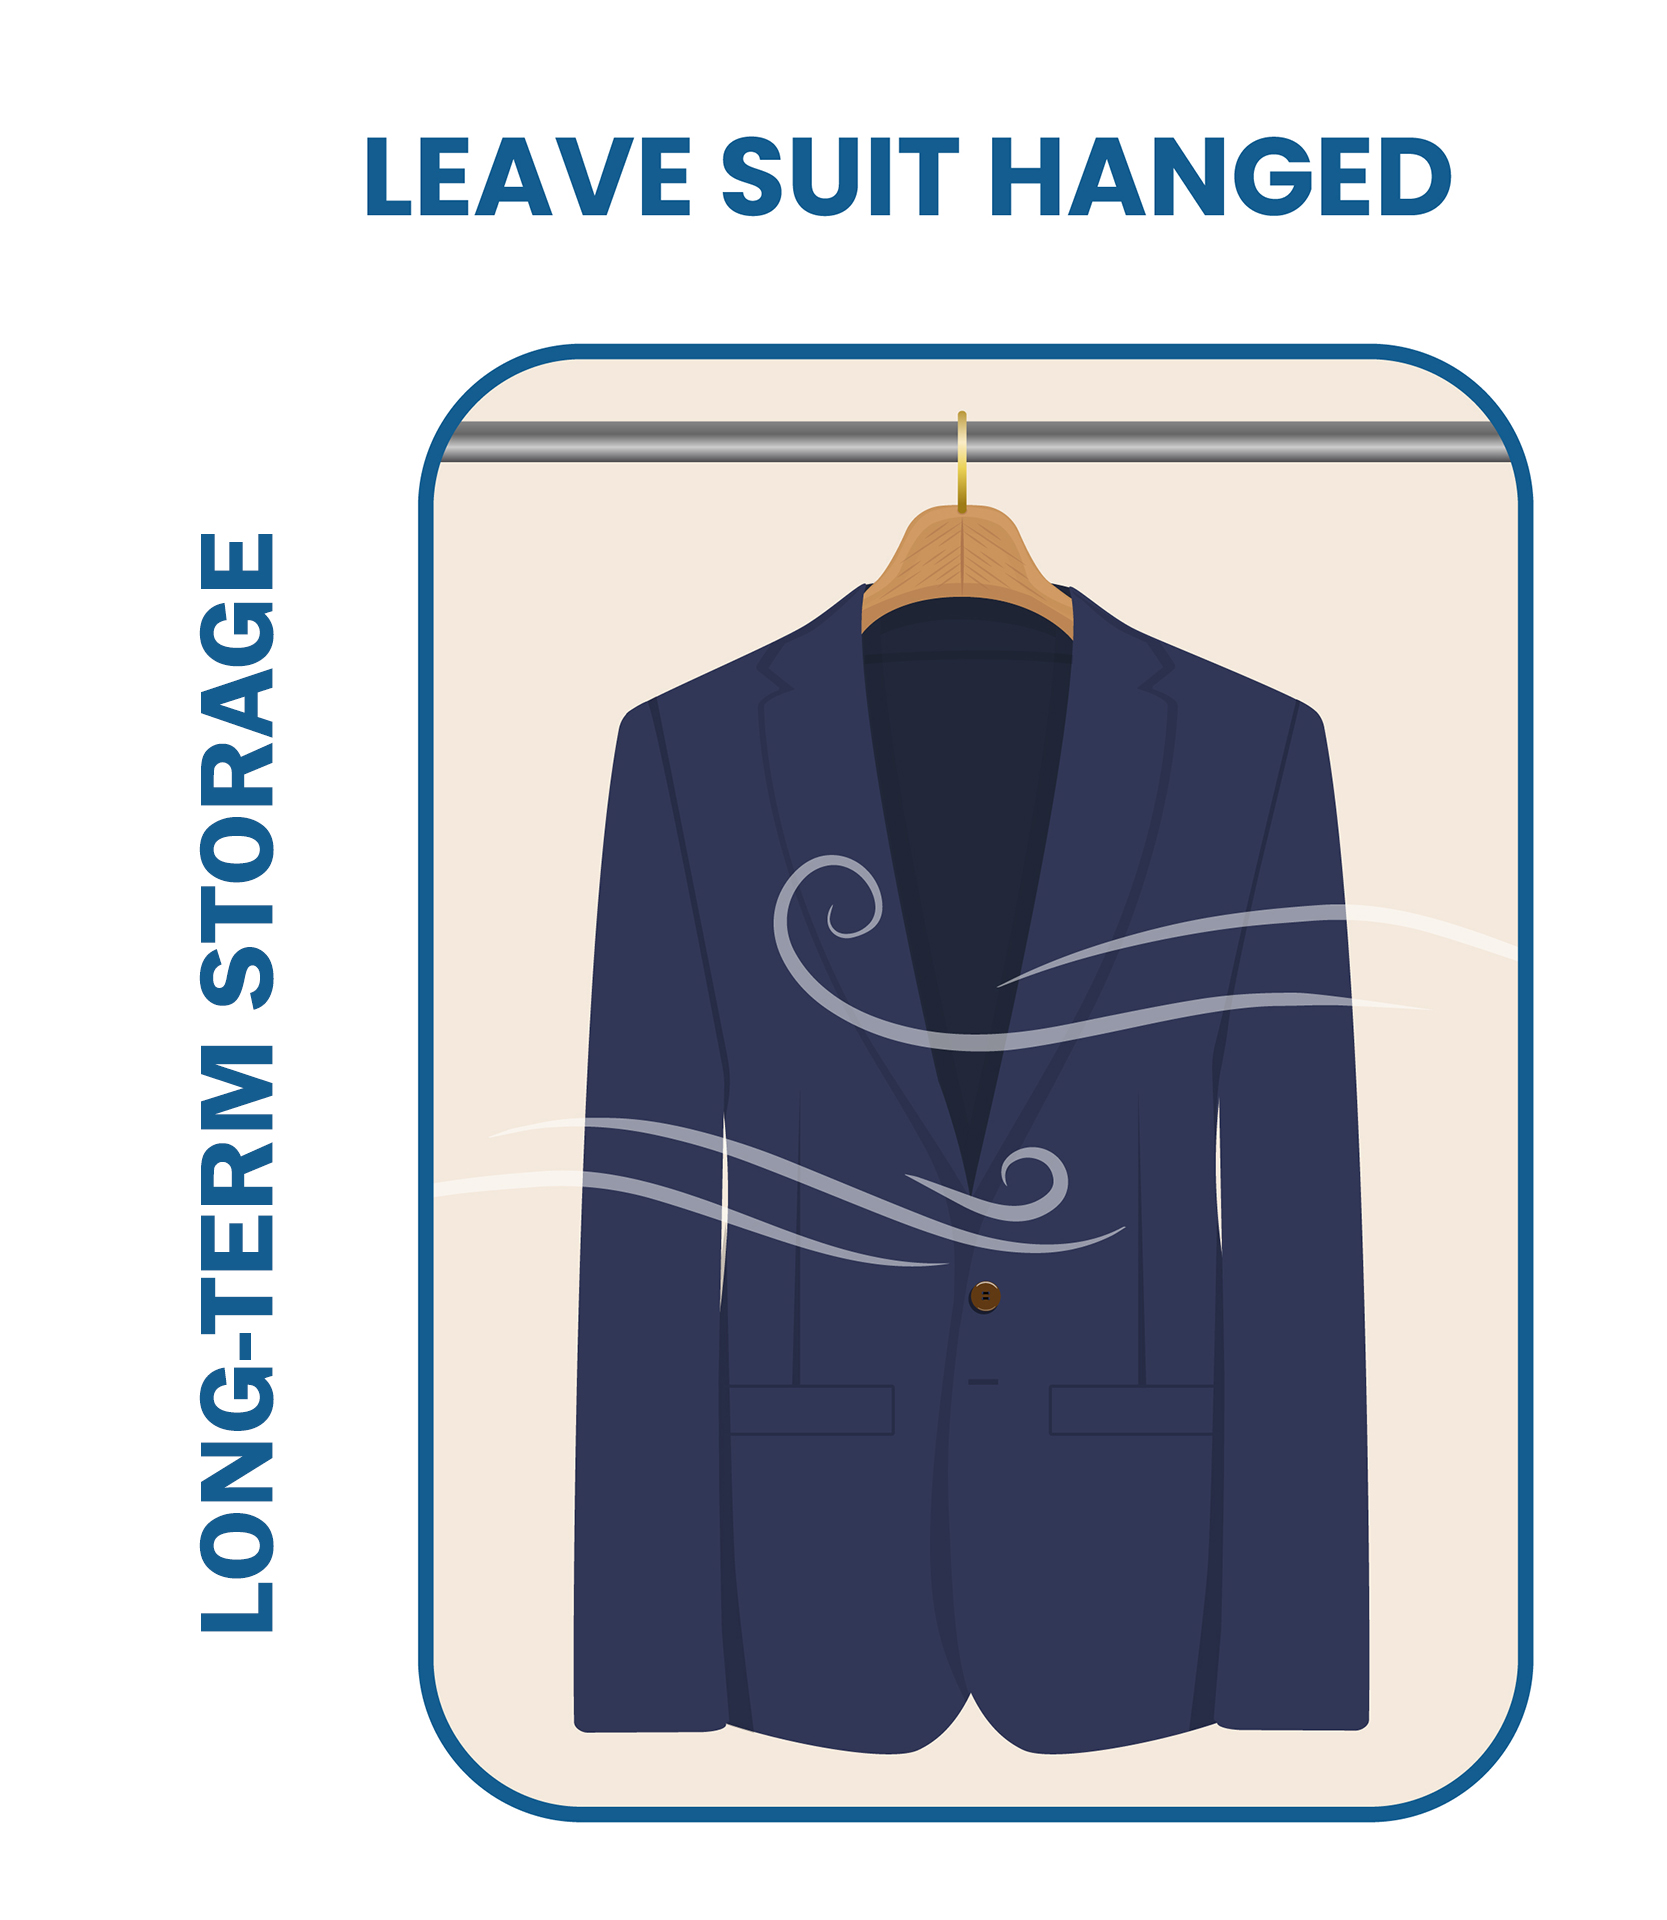 leave suit hanged in when removing from storage